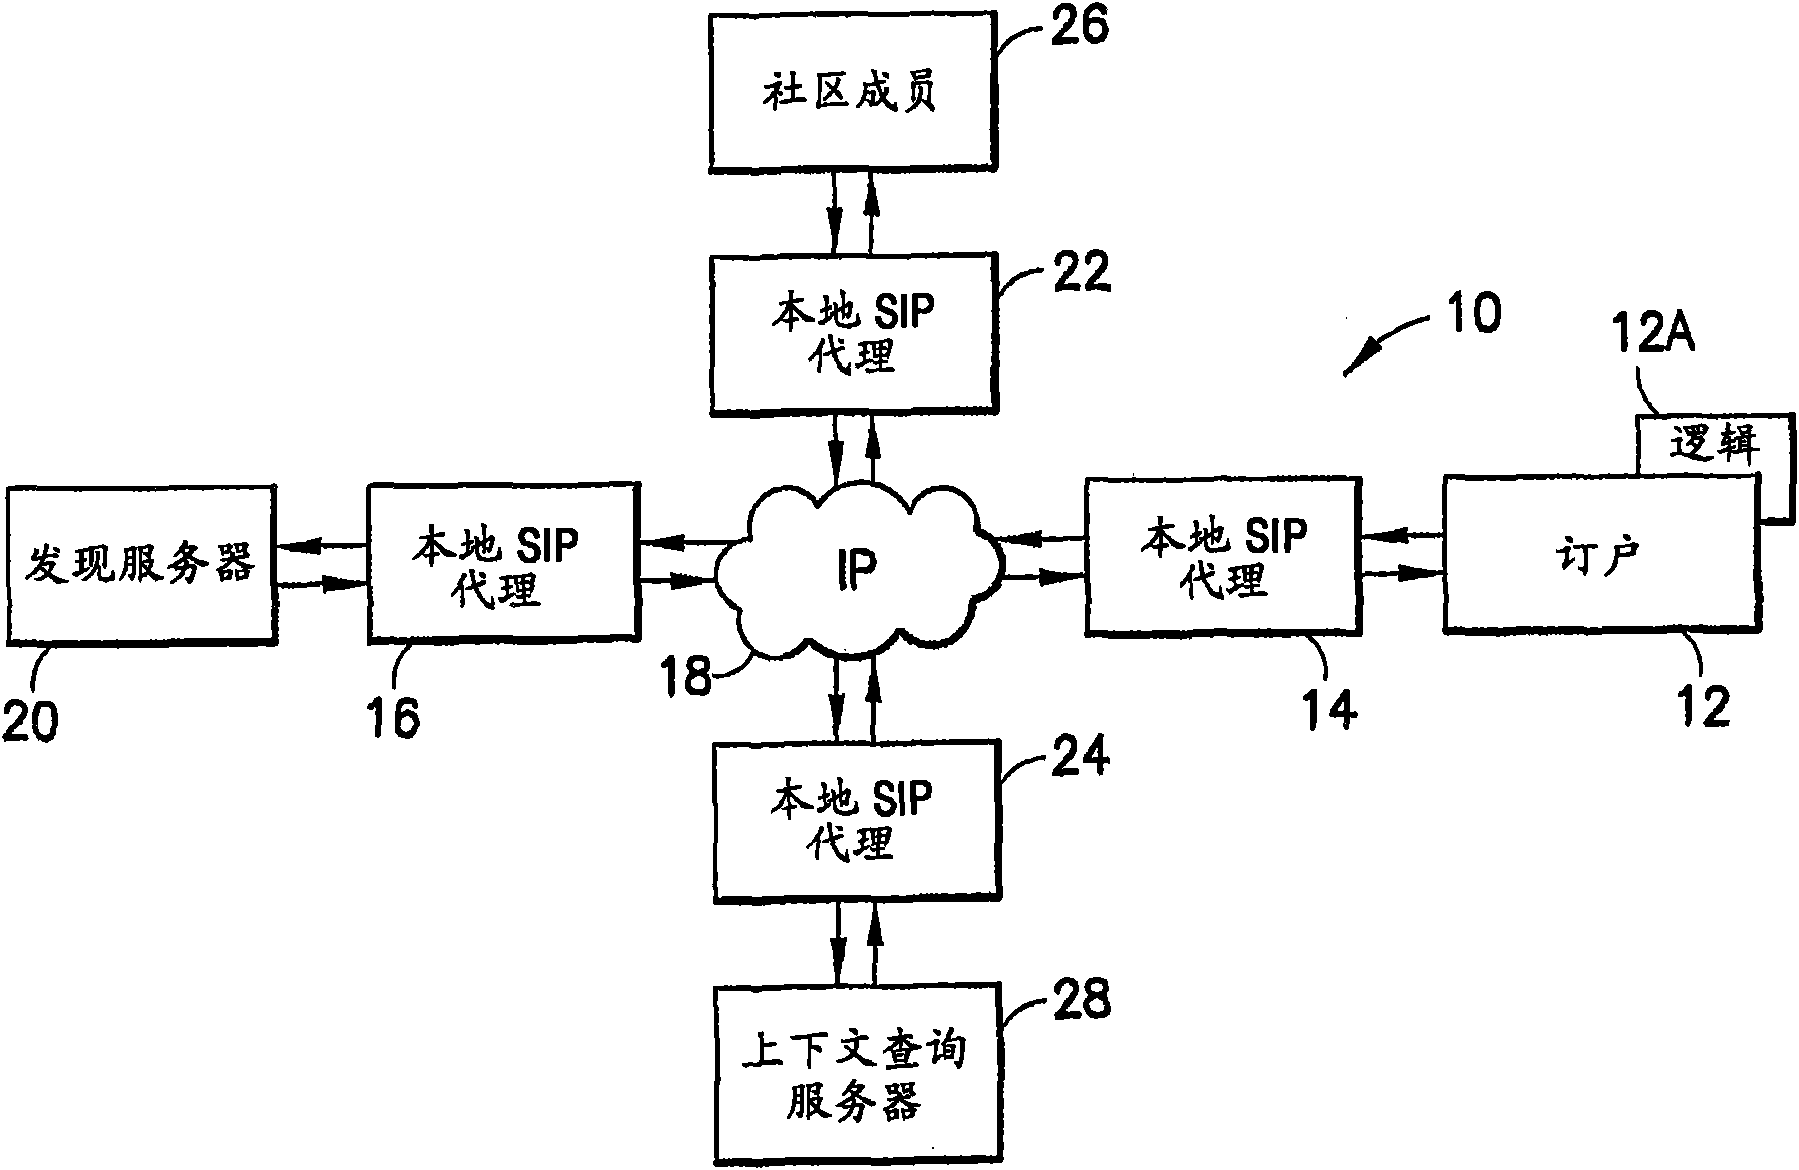 Method, system and system to enable discovery of services and content